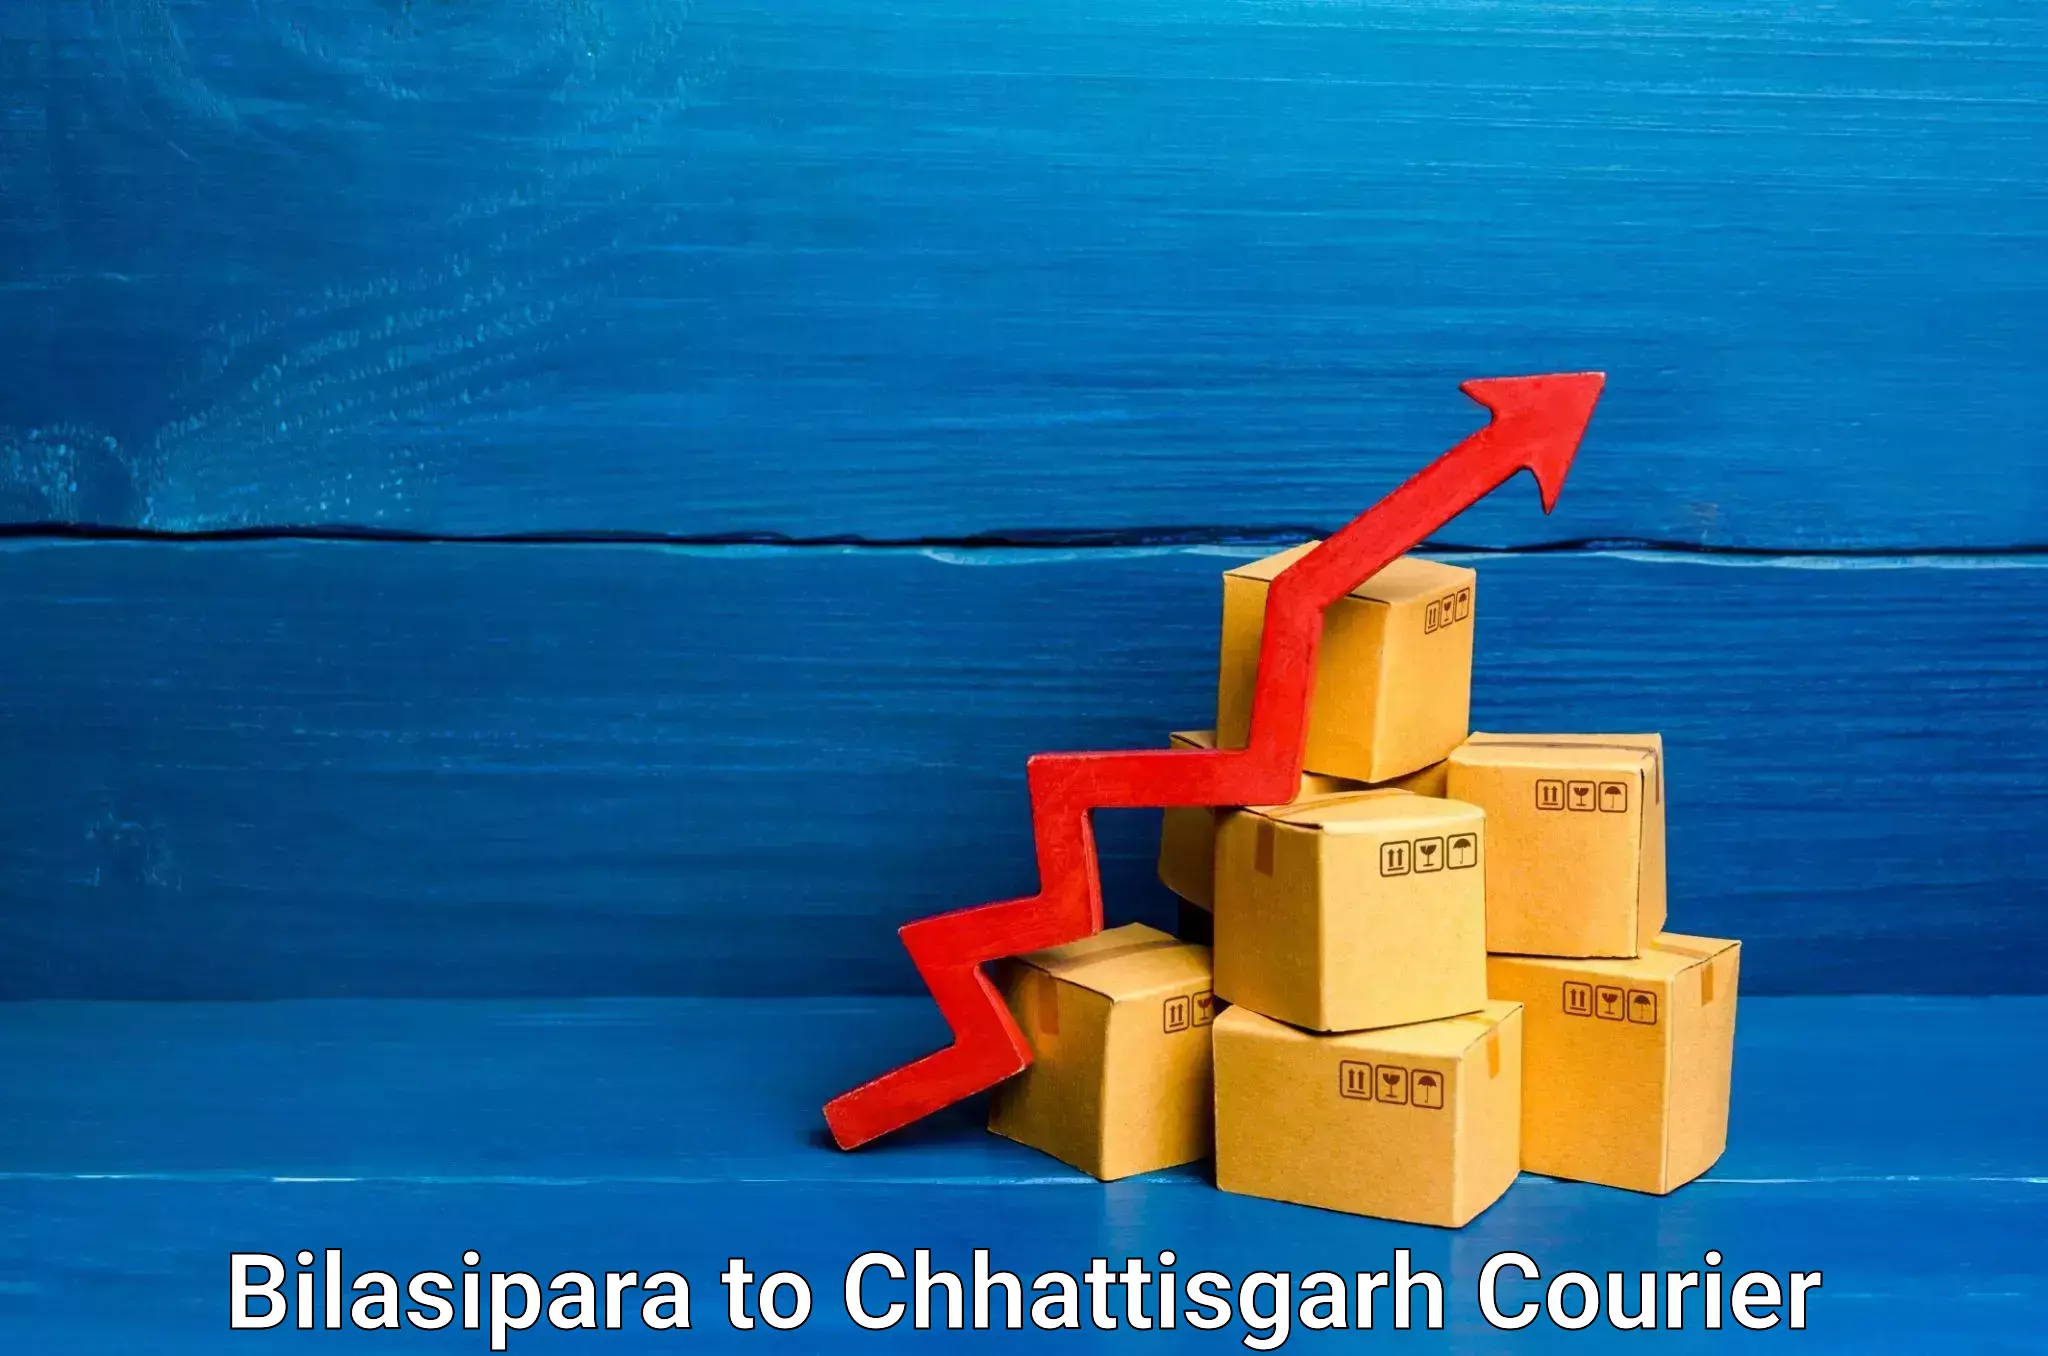 State-of-the-art courier technology Bilasipara to Pratappur